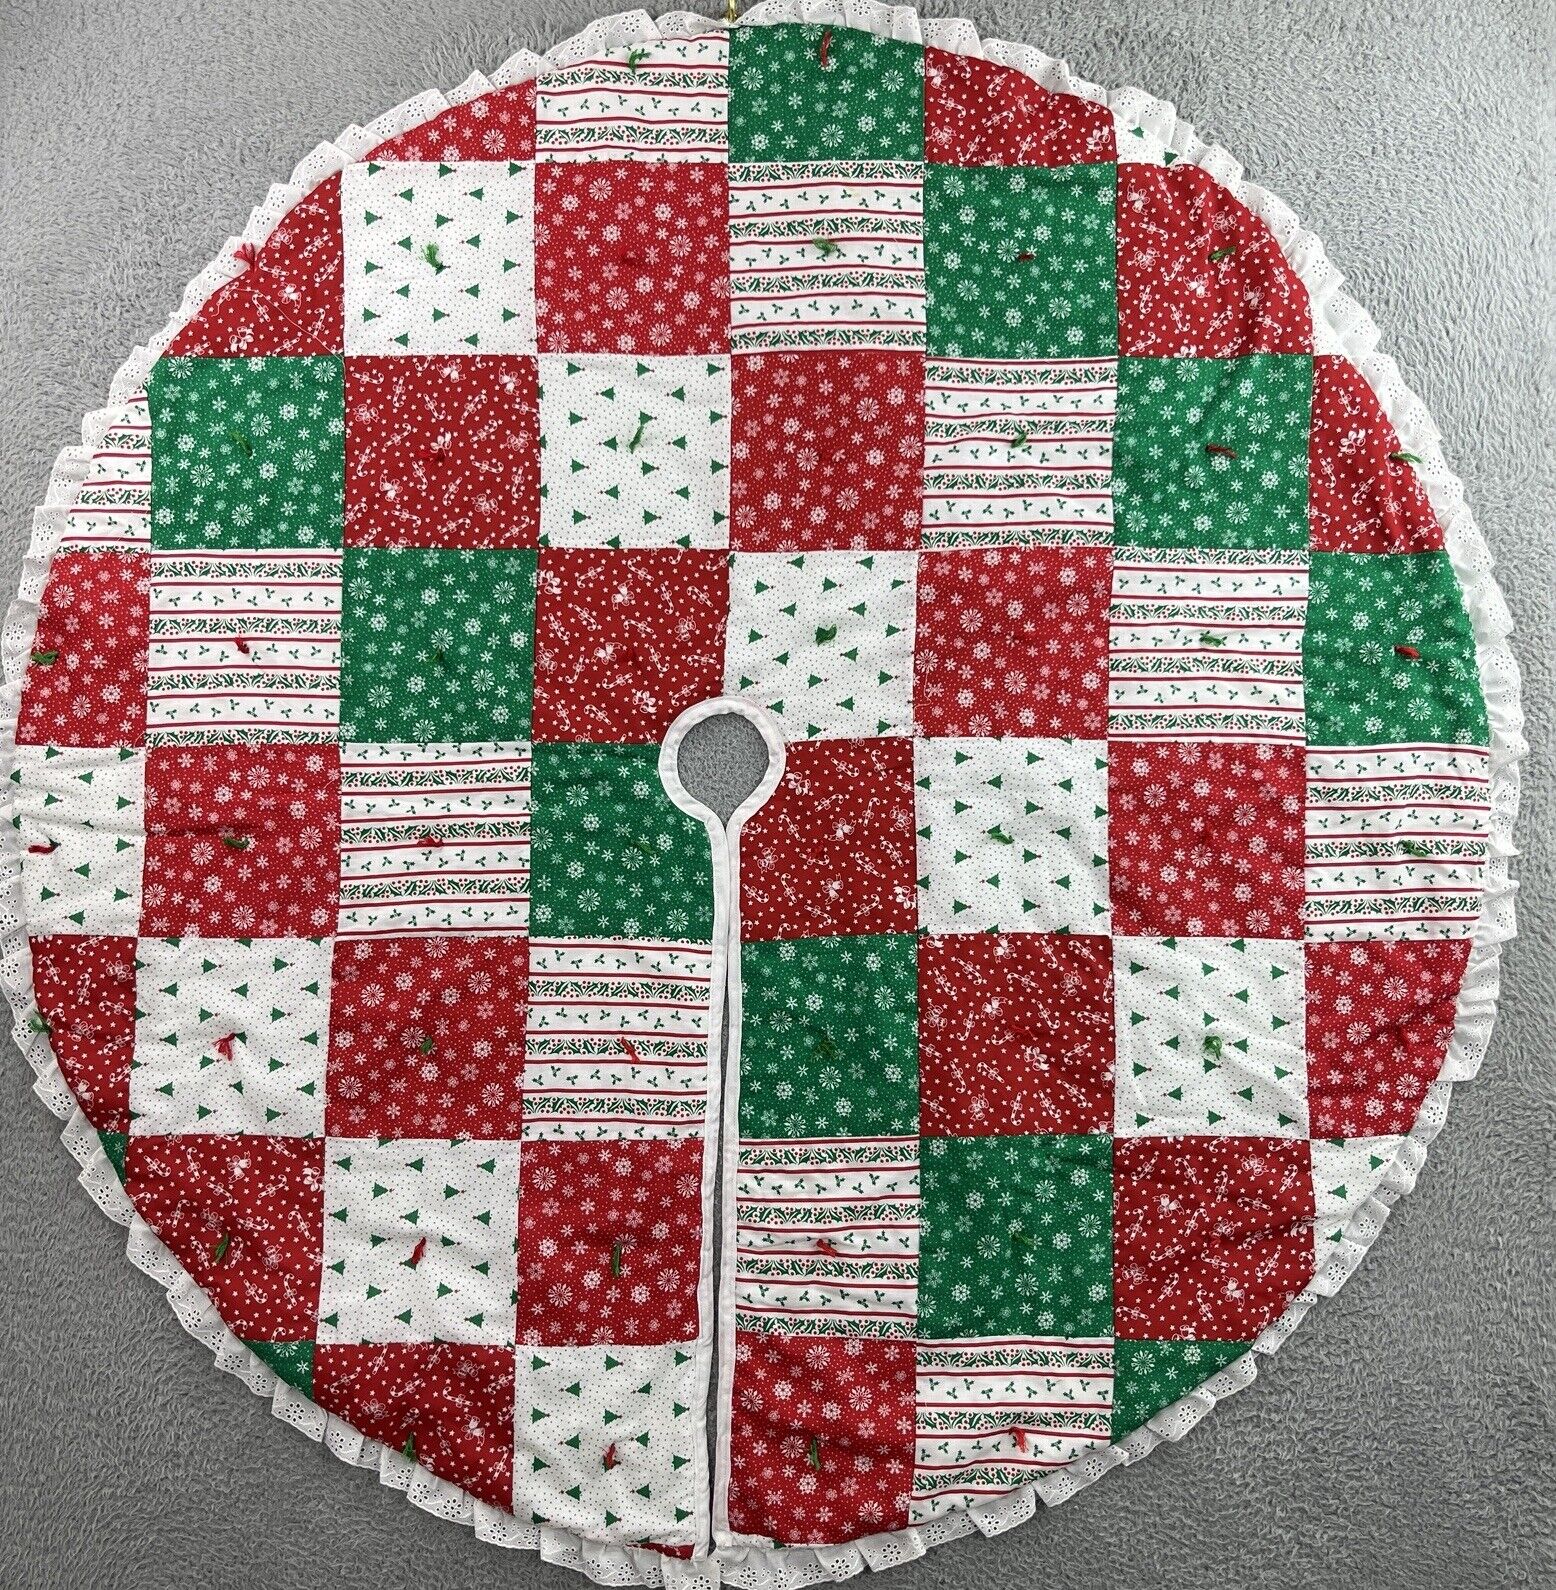 Vintage Patchwork Quilt Christmas Tree Skirt Eyelet Lace Ruffle 46.5-48.5”